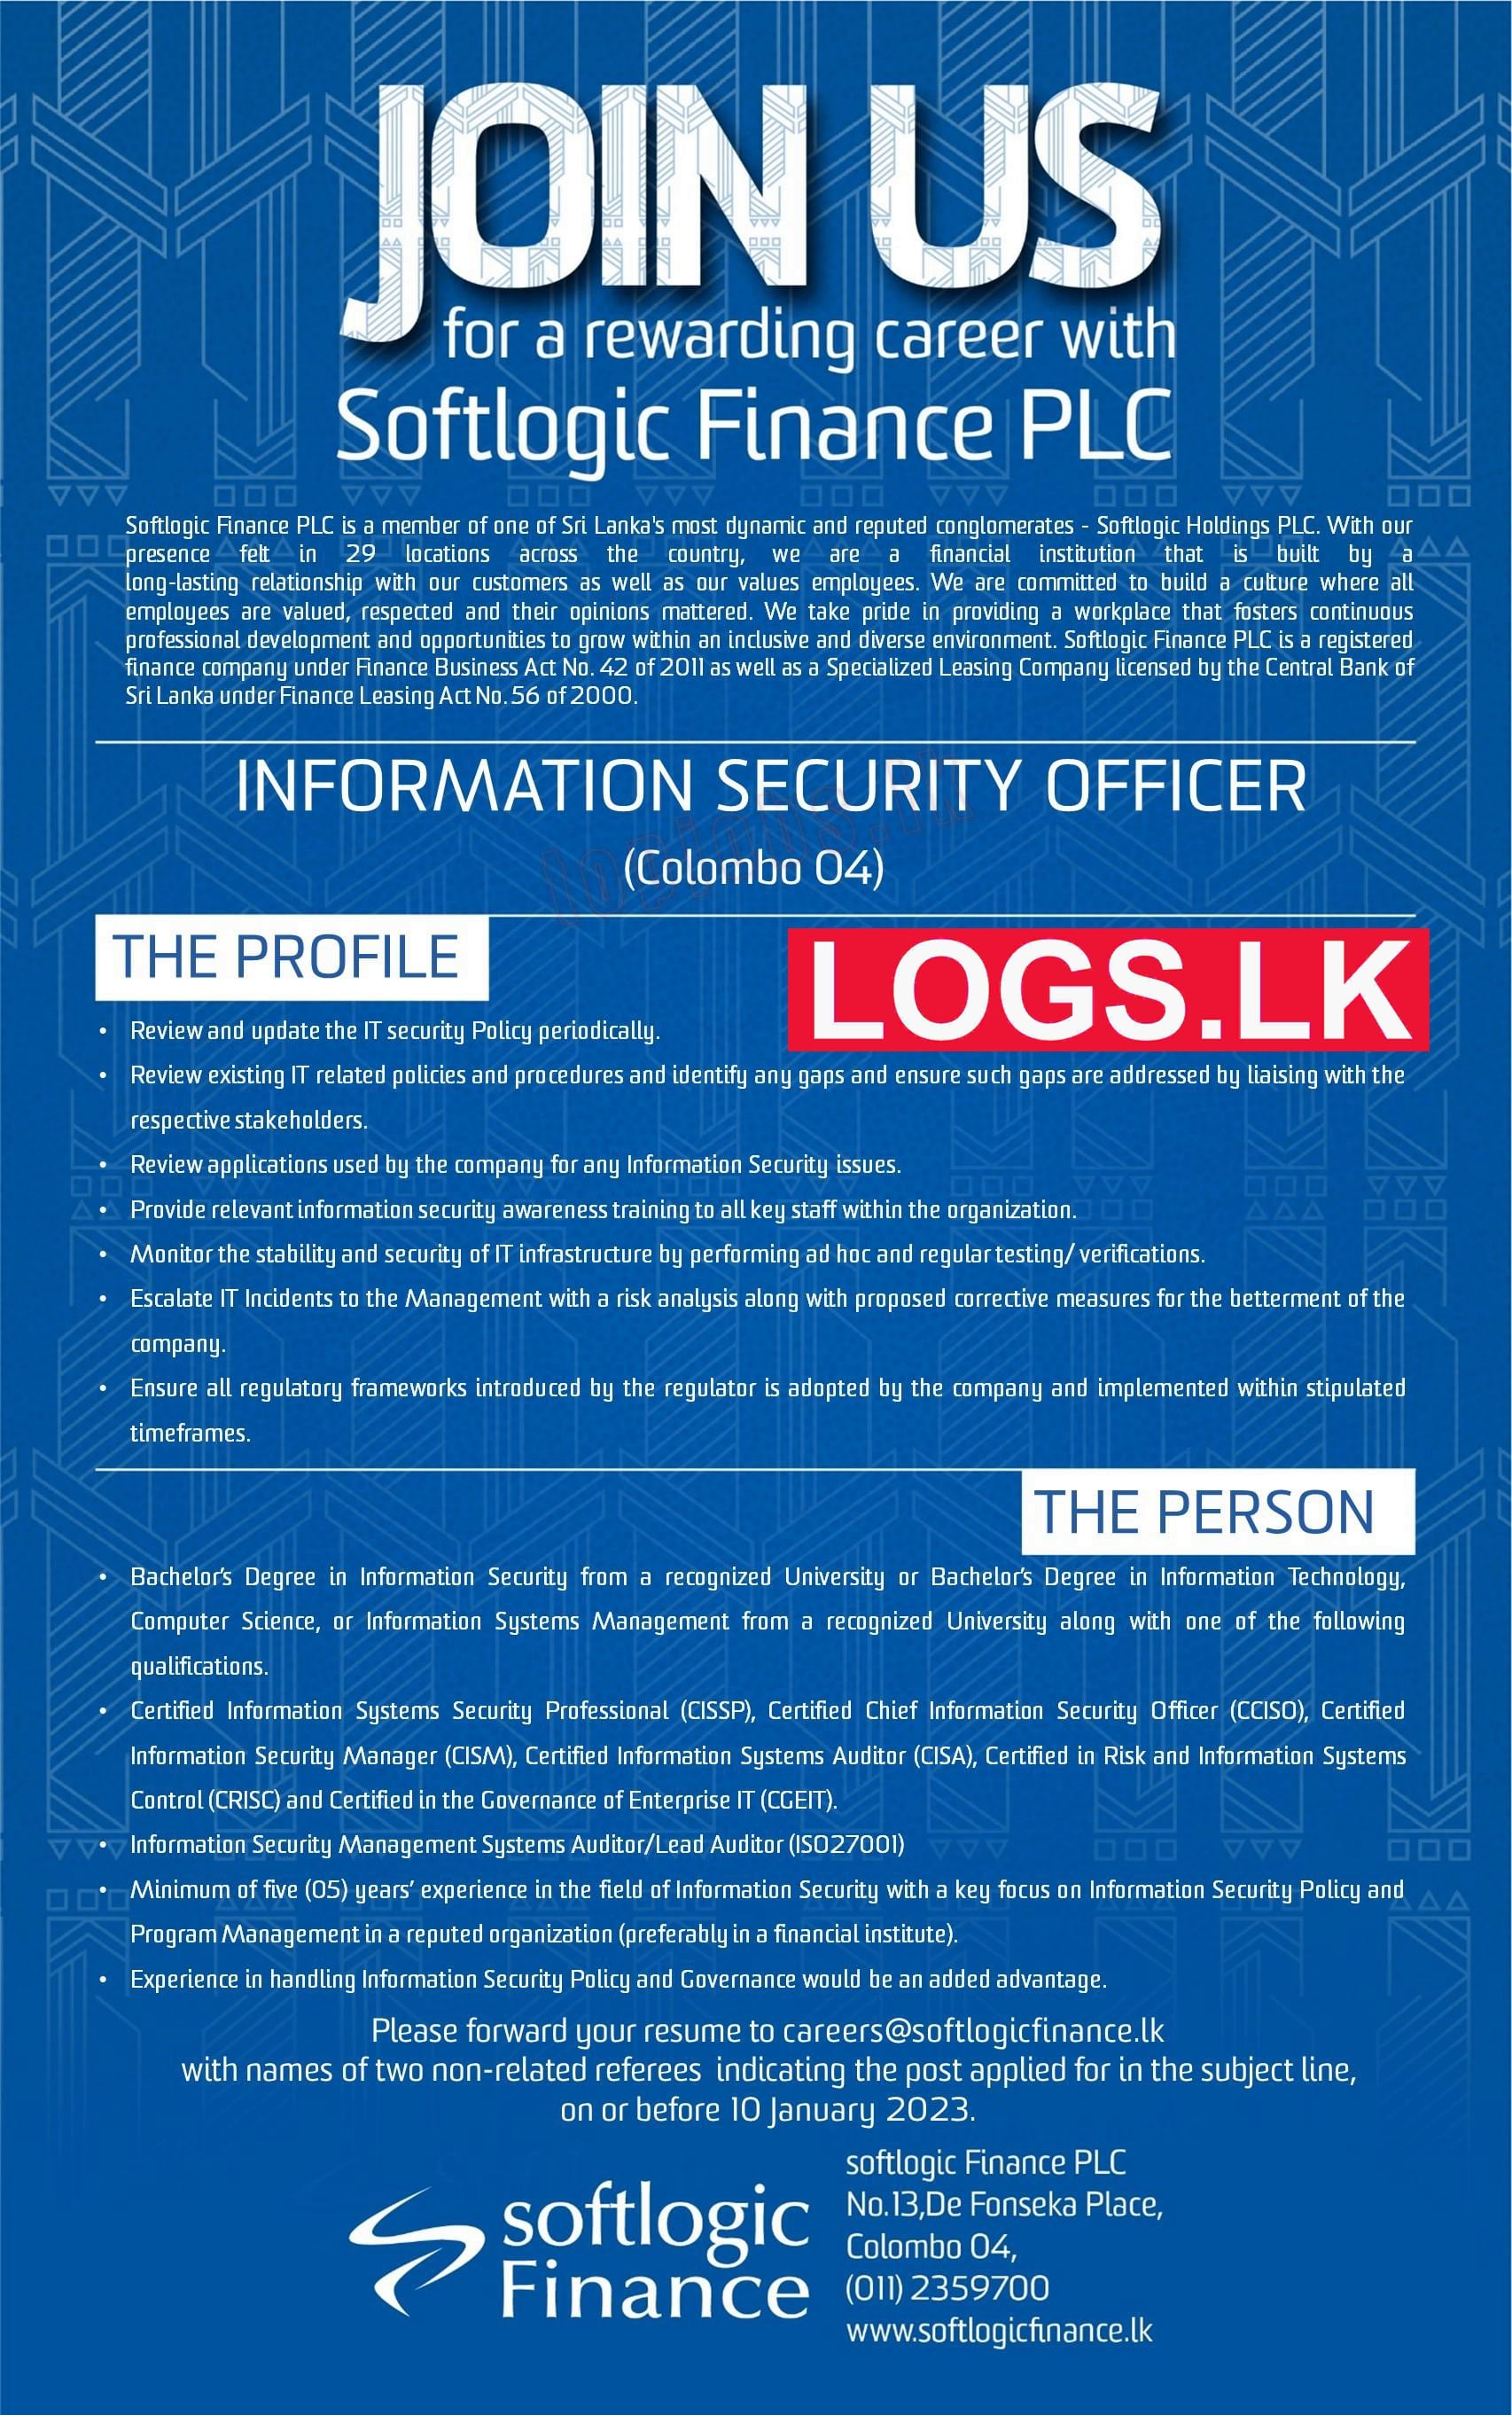 Information Security Officer - Softlogic Finance Vacancies 2023 Application Form Download